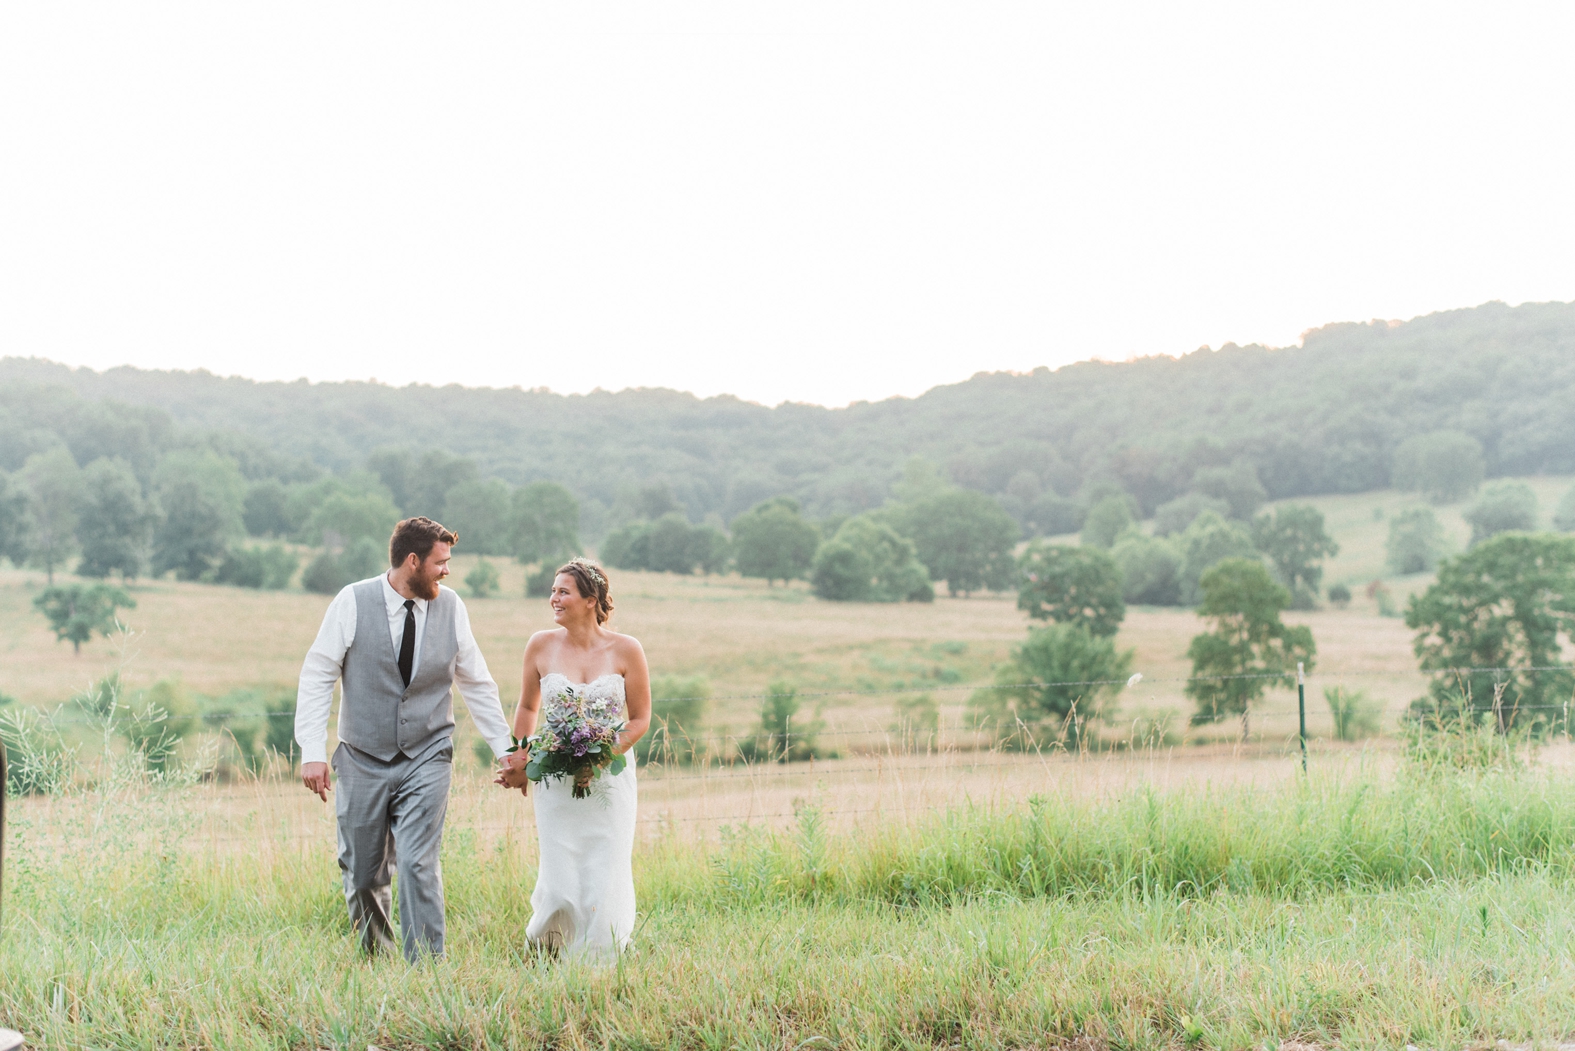 Bride and groom walking in field at Little Piney Lodge in Hermann, MO. Bride in strapless sweetheart lace wedding gown with purple bouquet with succulents. Groom in gray suit with black tie.